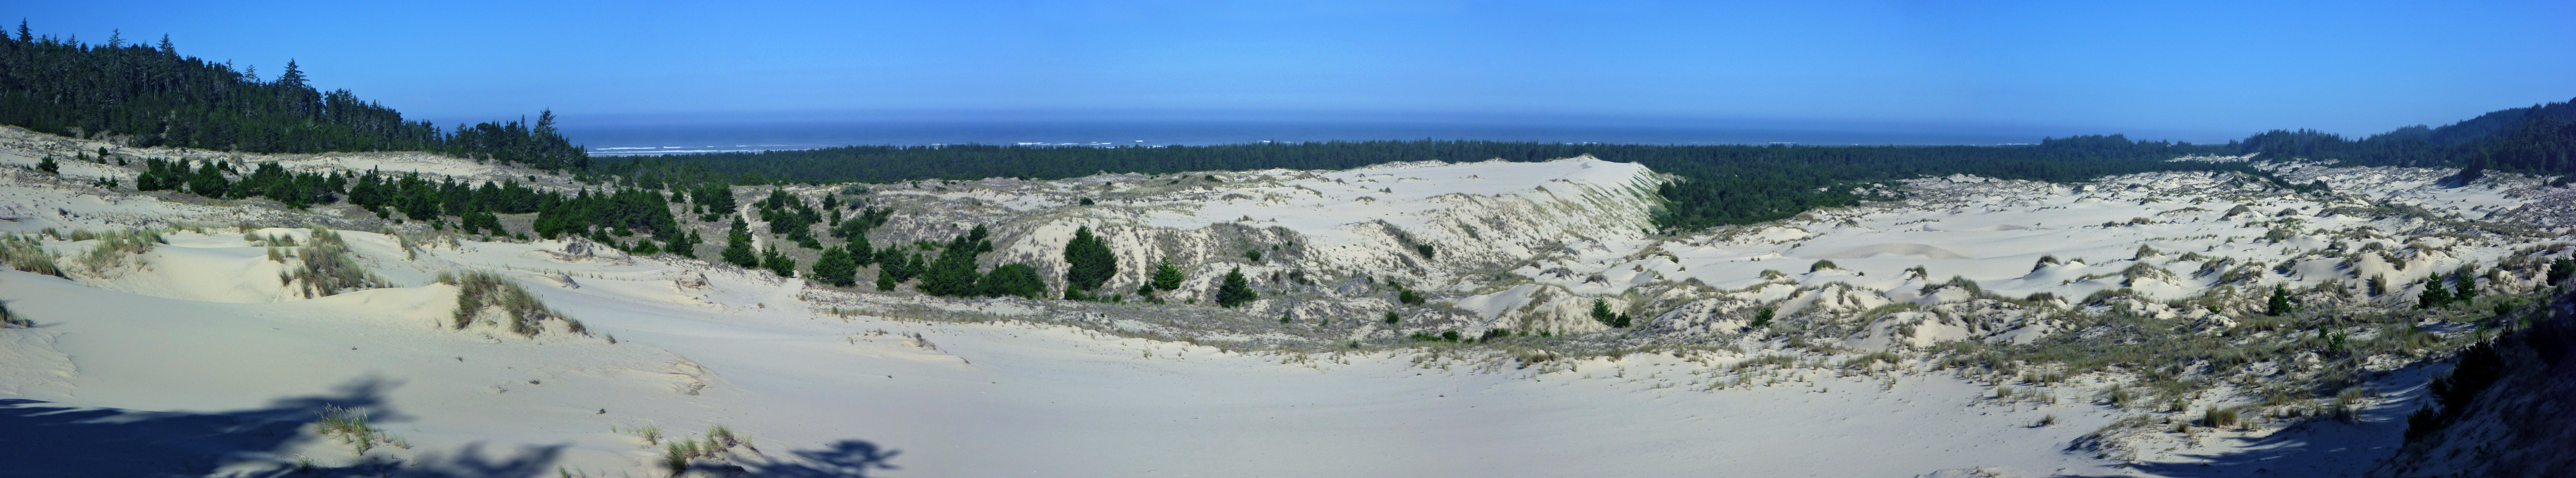 Dunes and forest near Tahkenitch Creek